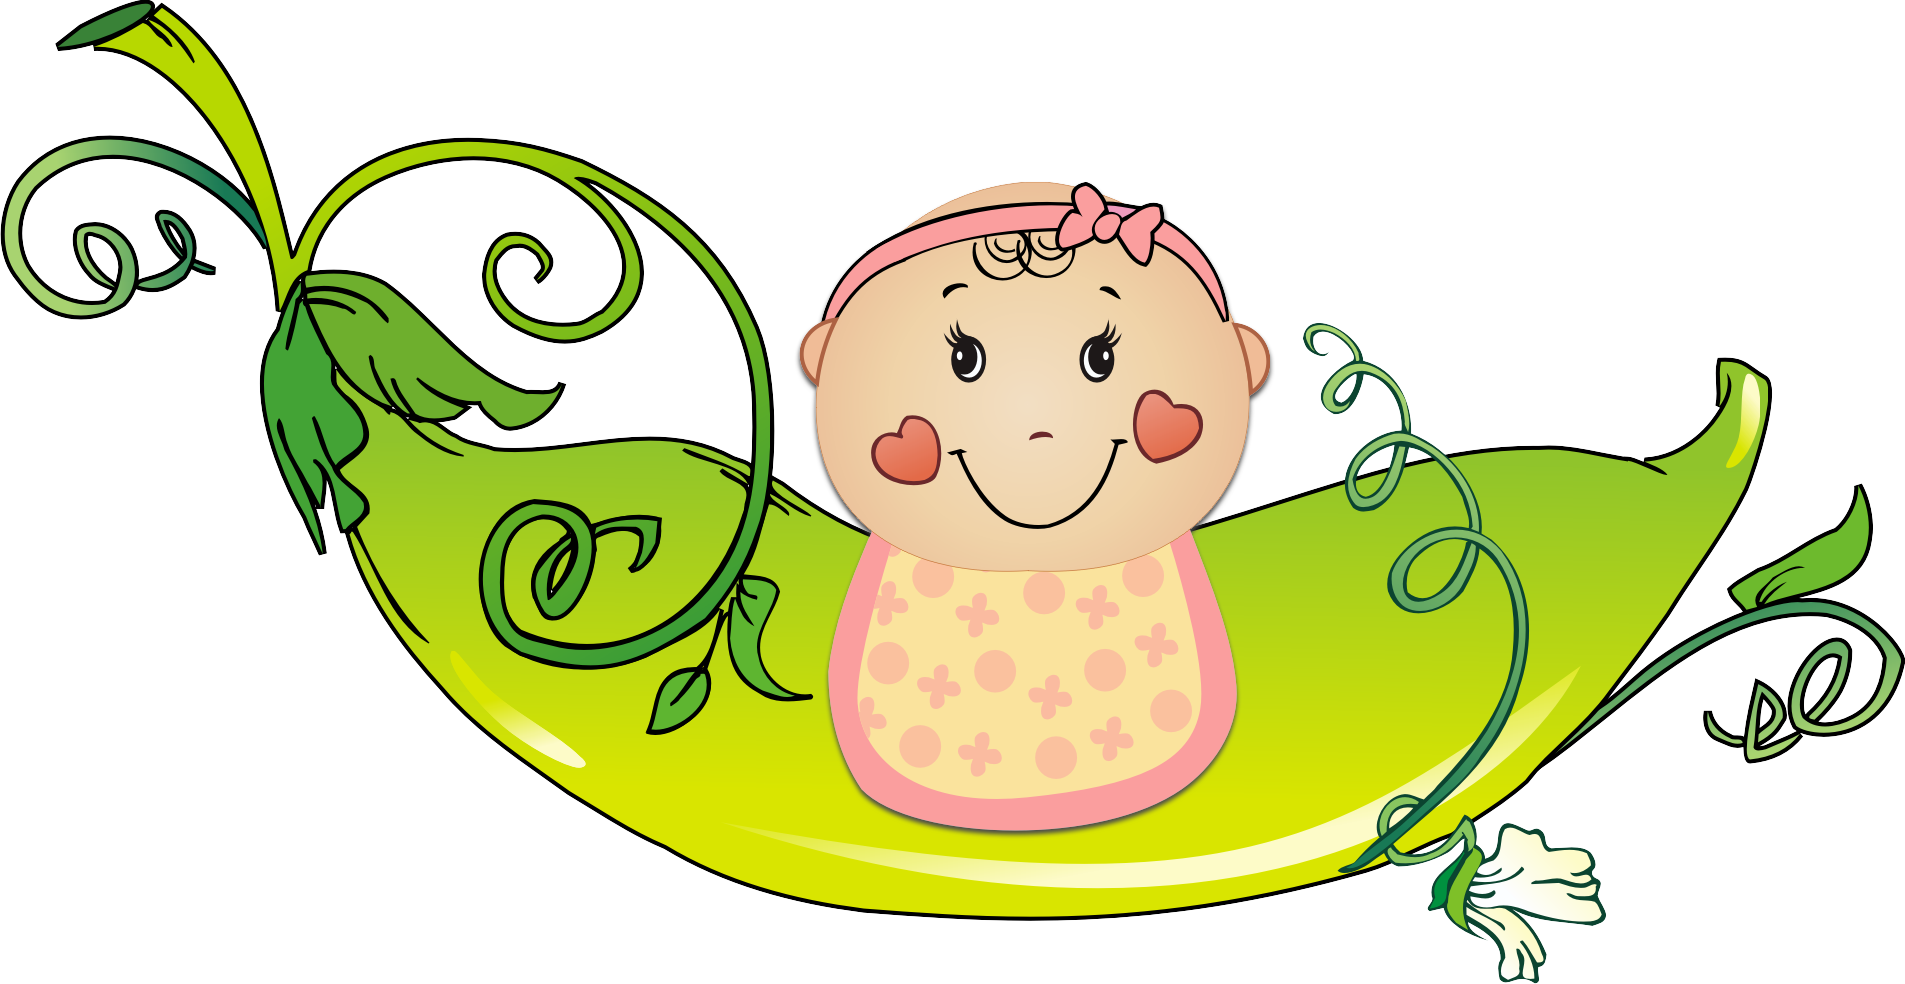 free clipart images baby girl - photo #39